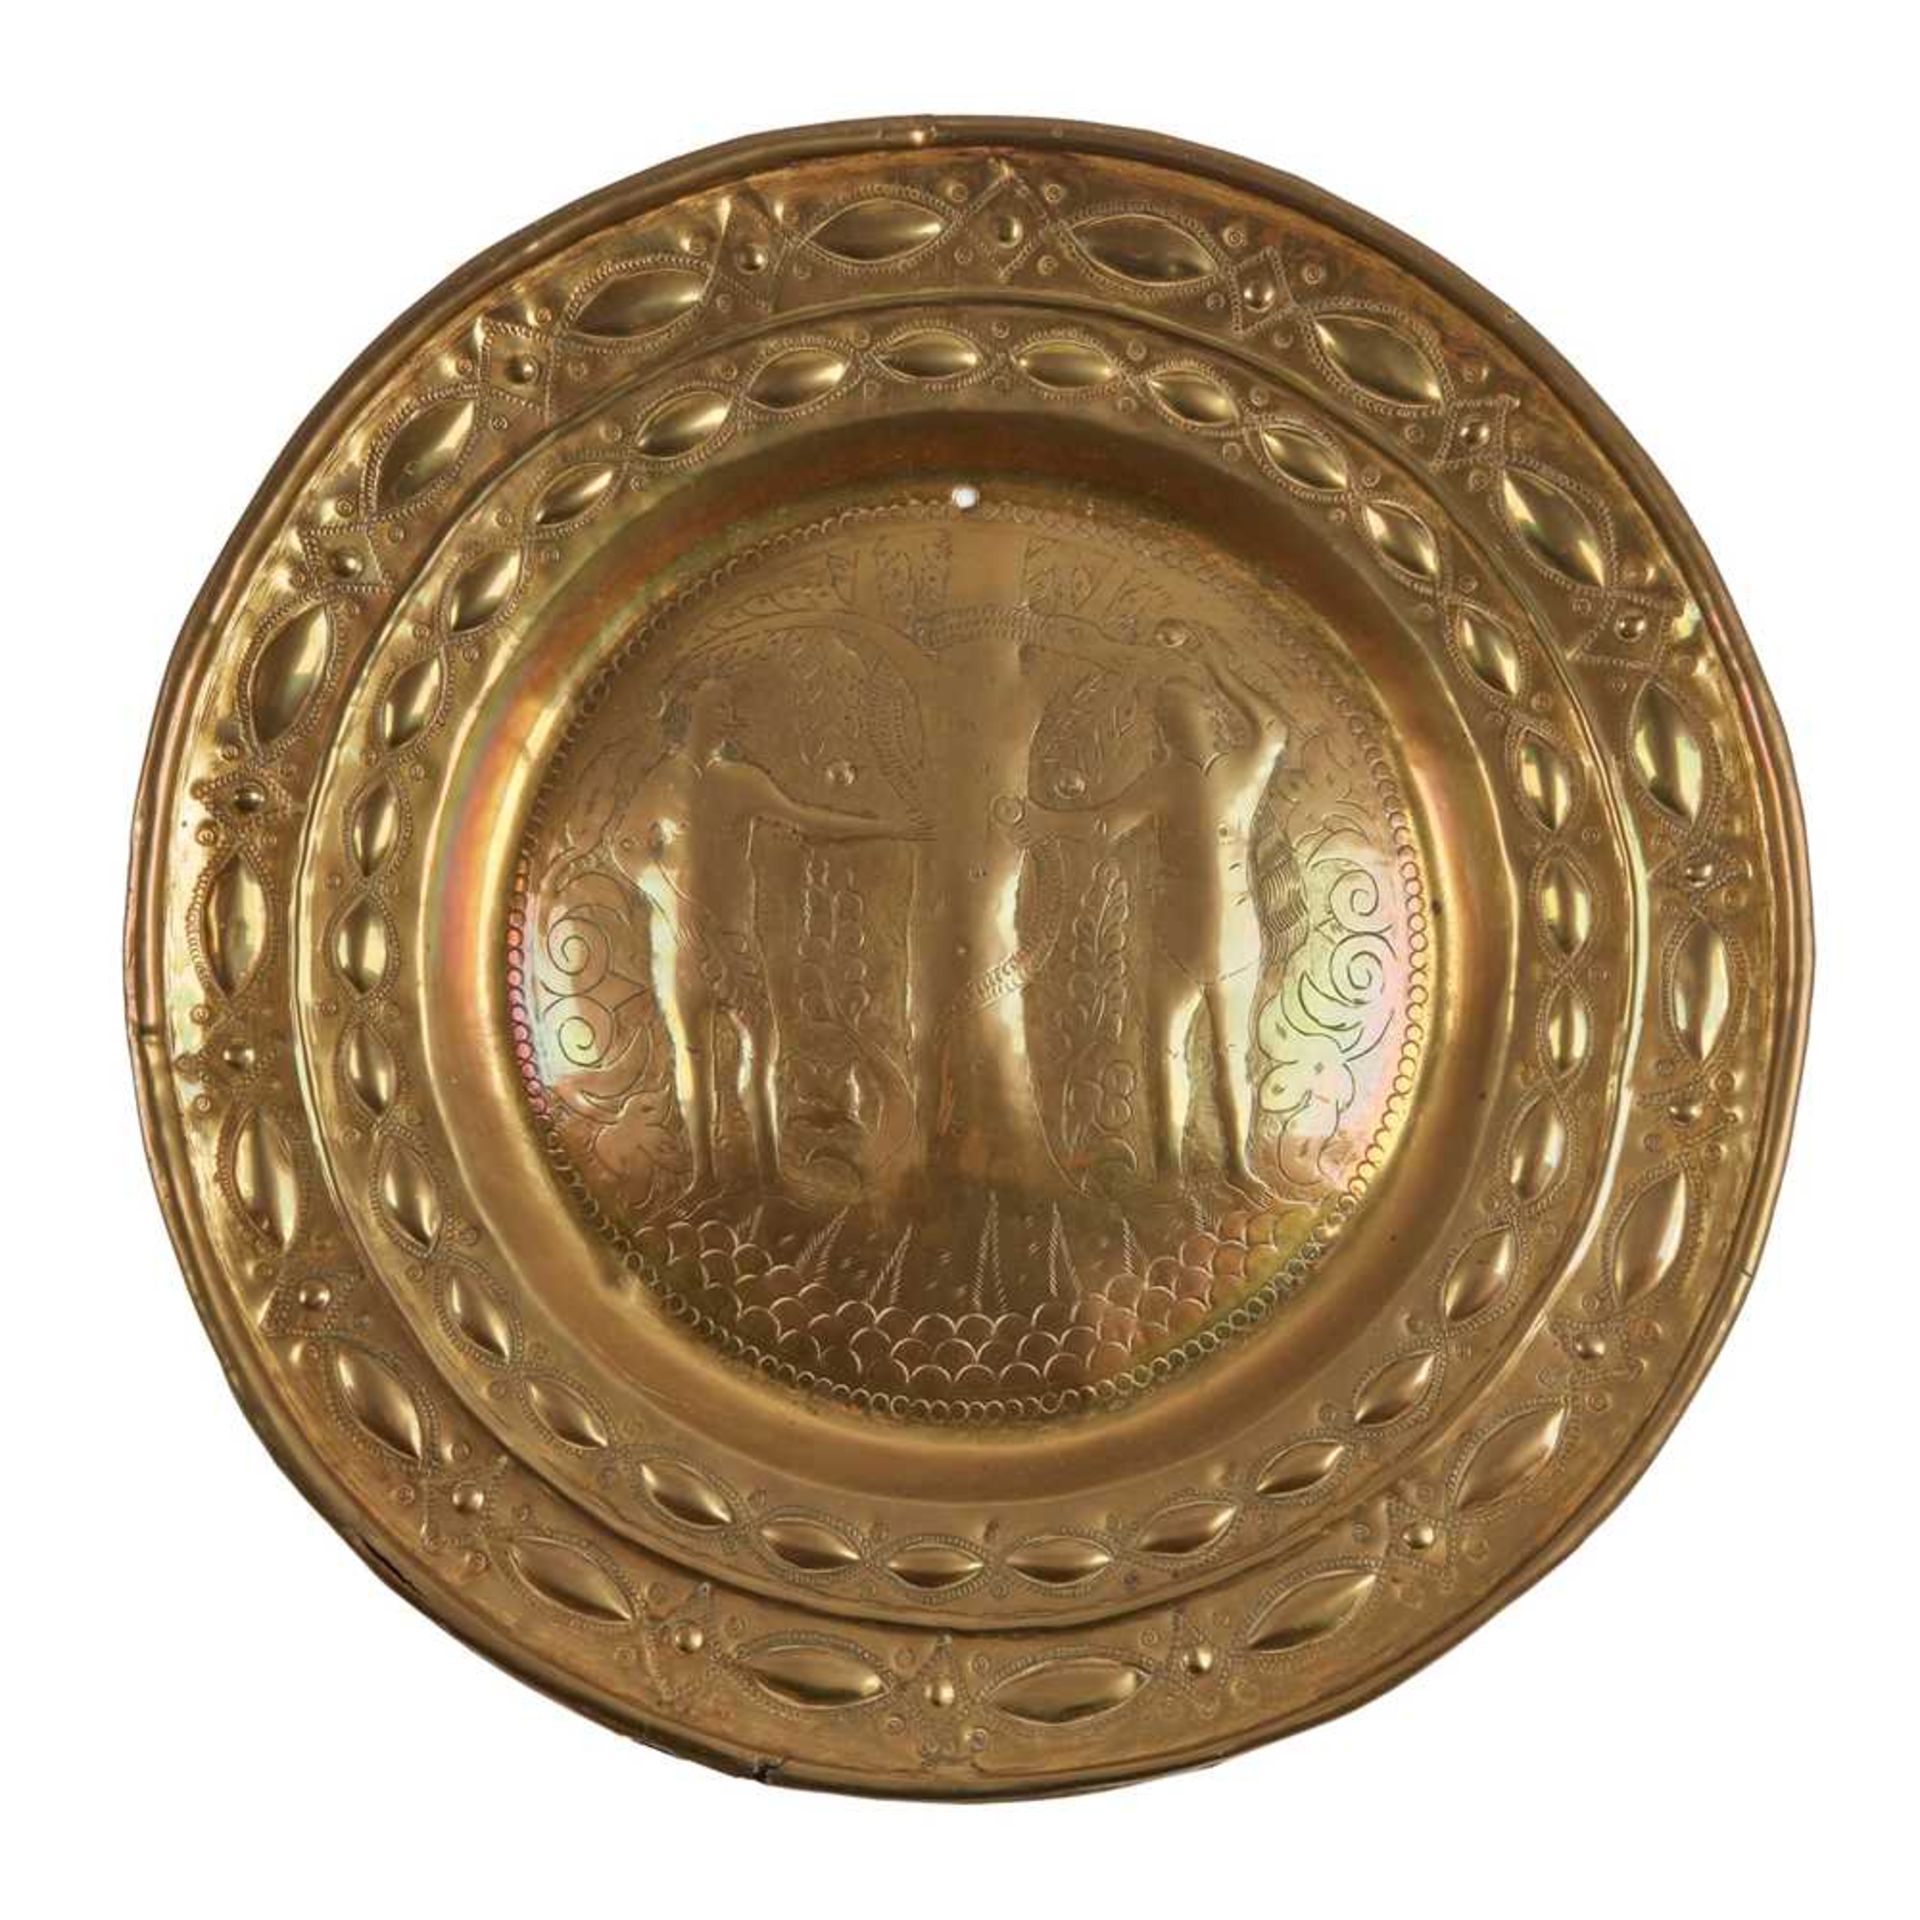 TWO GERMAN NUREMBERG BRASS ‘ADAM AND EVE’ ALMS DISHES 17TH CENTURY - Image 3 of 3